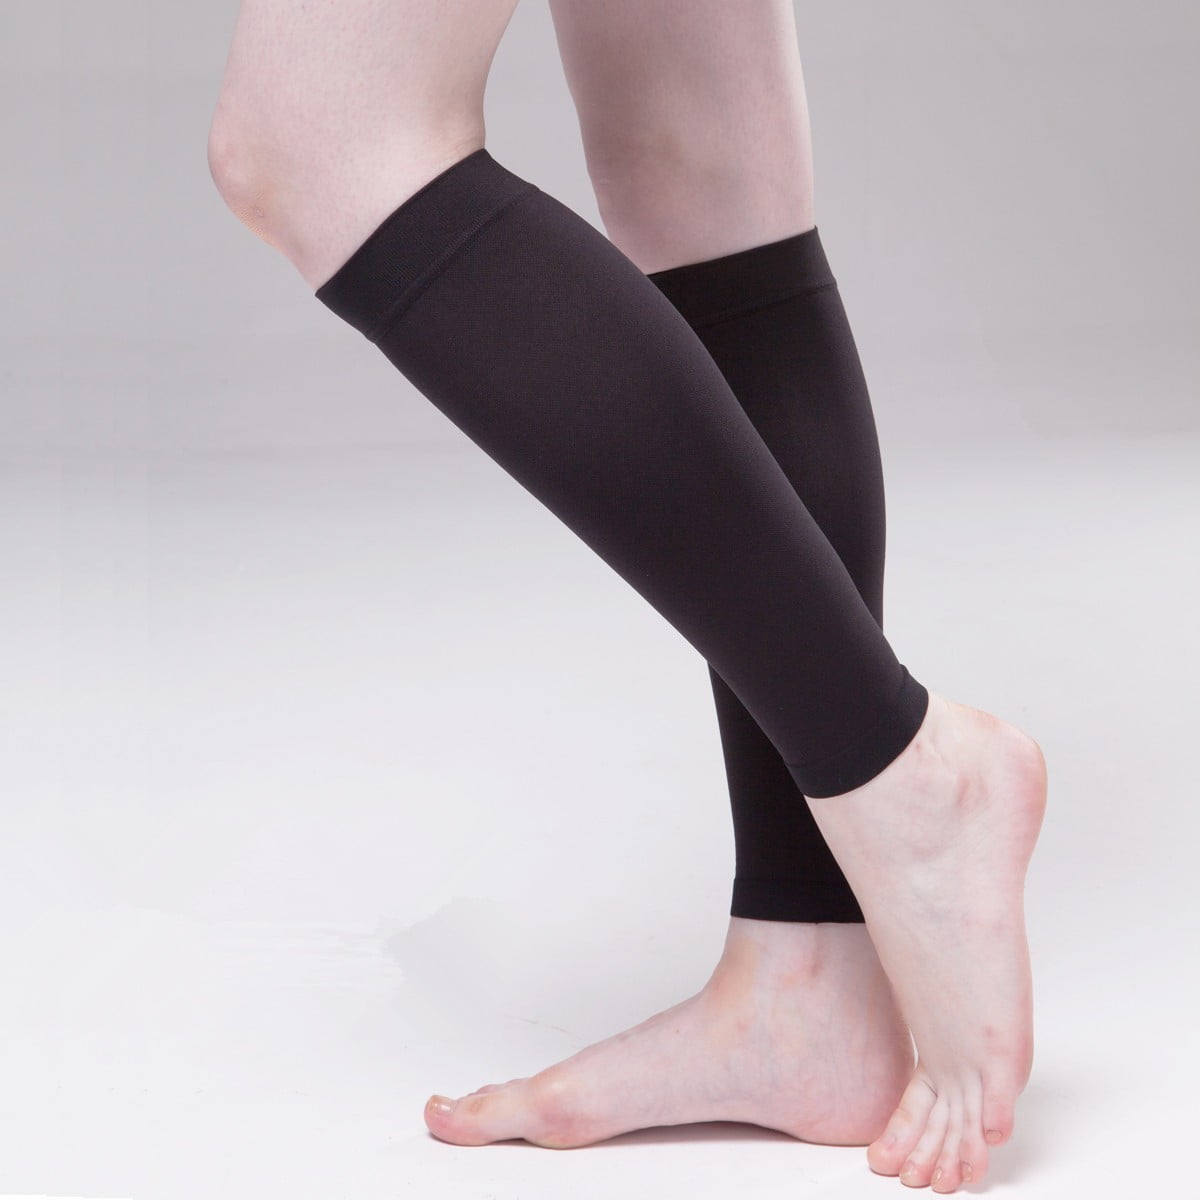 Compression Leggings For Varicose Veins Canada  International Society of  Precision Agriculture